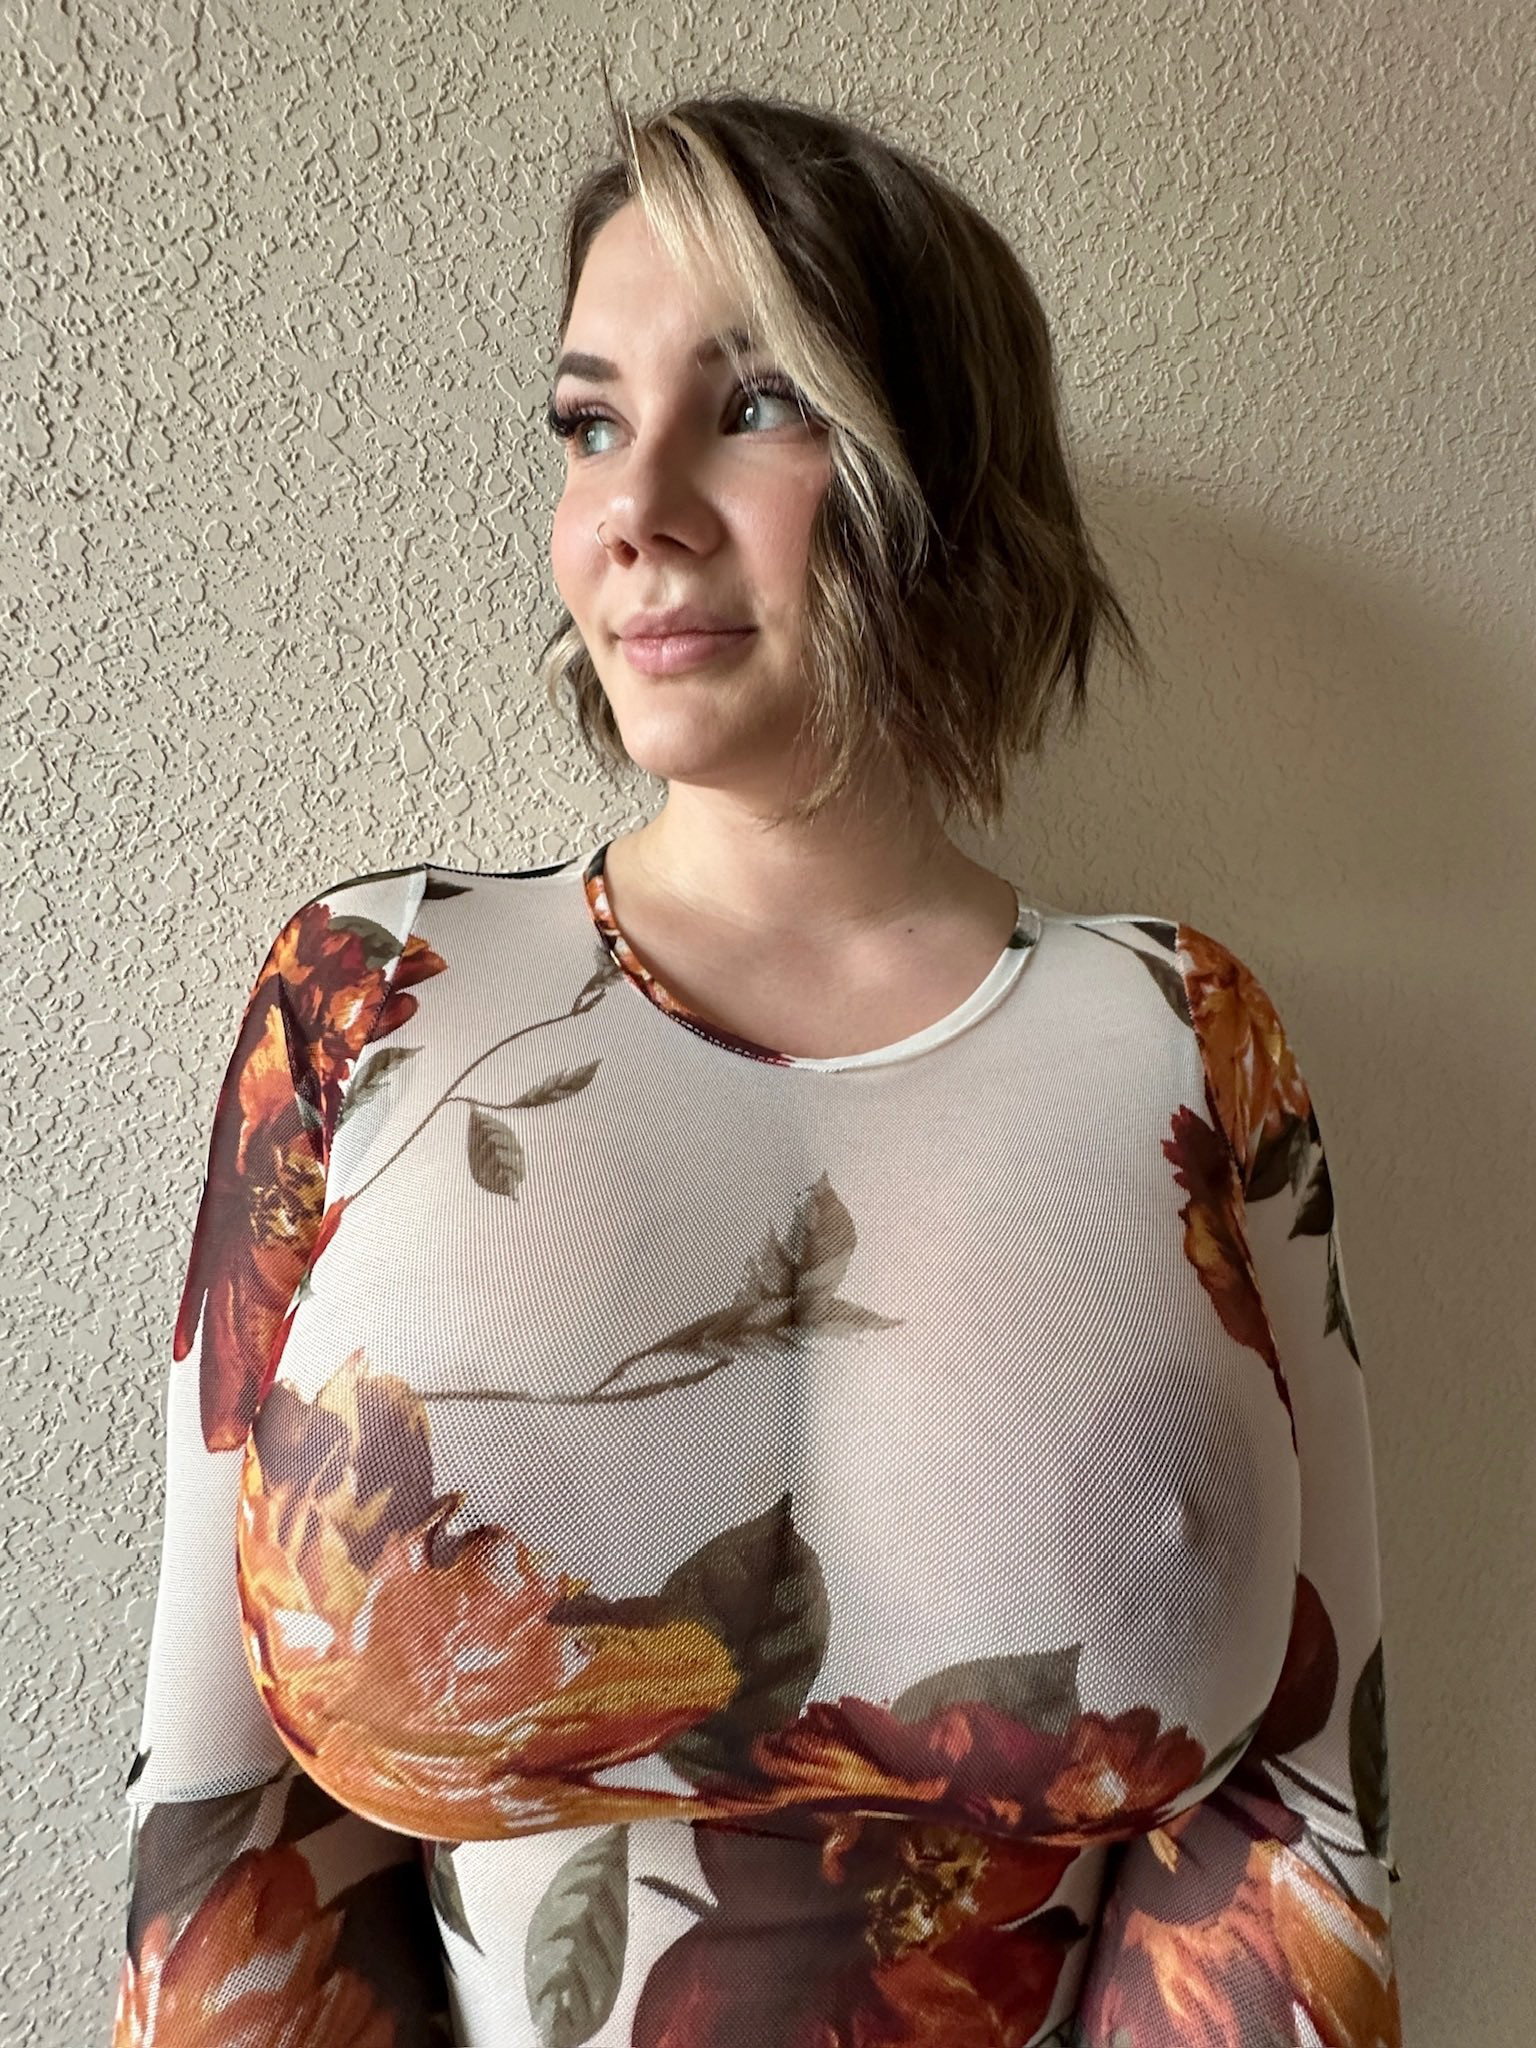 Watch the Photo by TonyWarmer with the username @TonyWarmer, posted on March 12, 2024. The post is about the topic Large Areolas and Nipples.